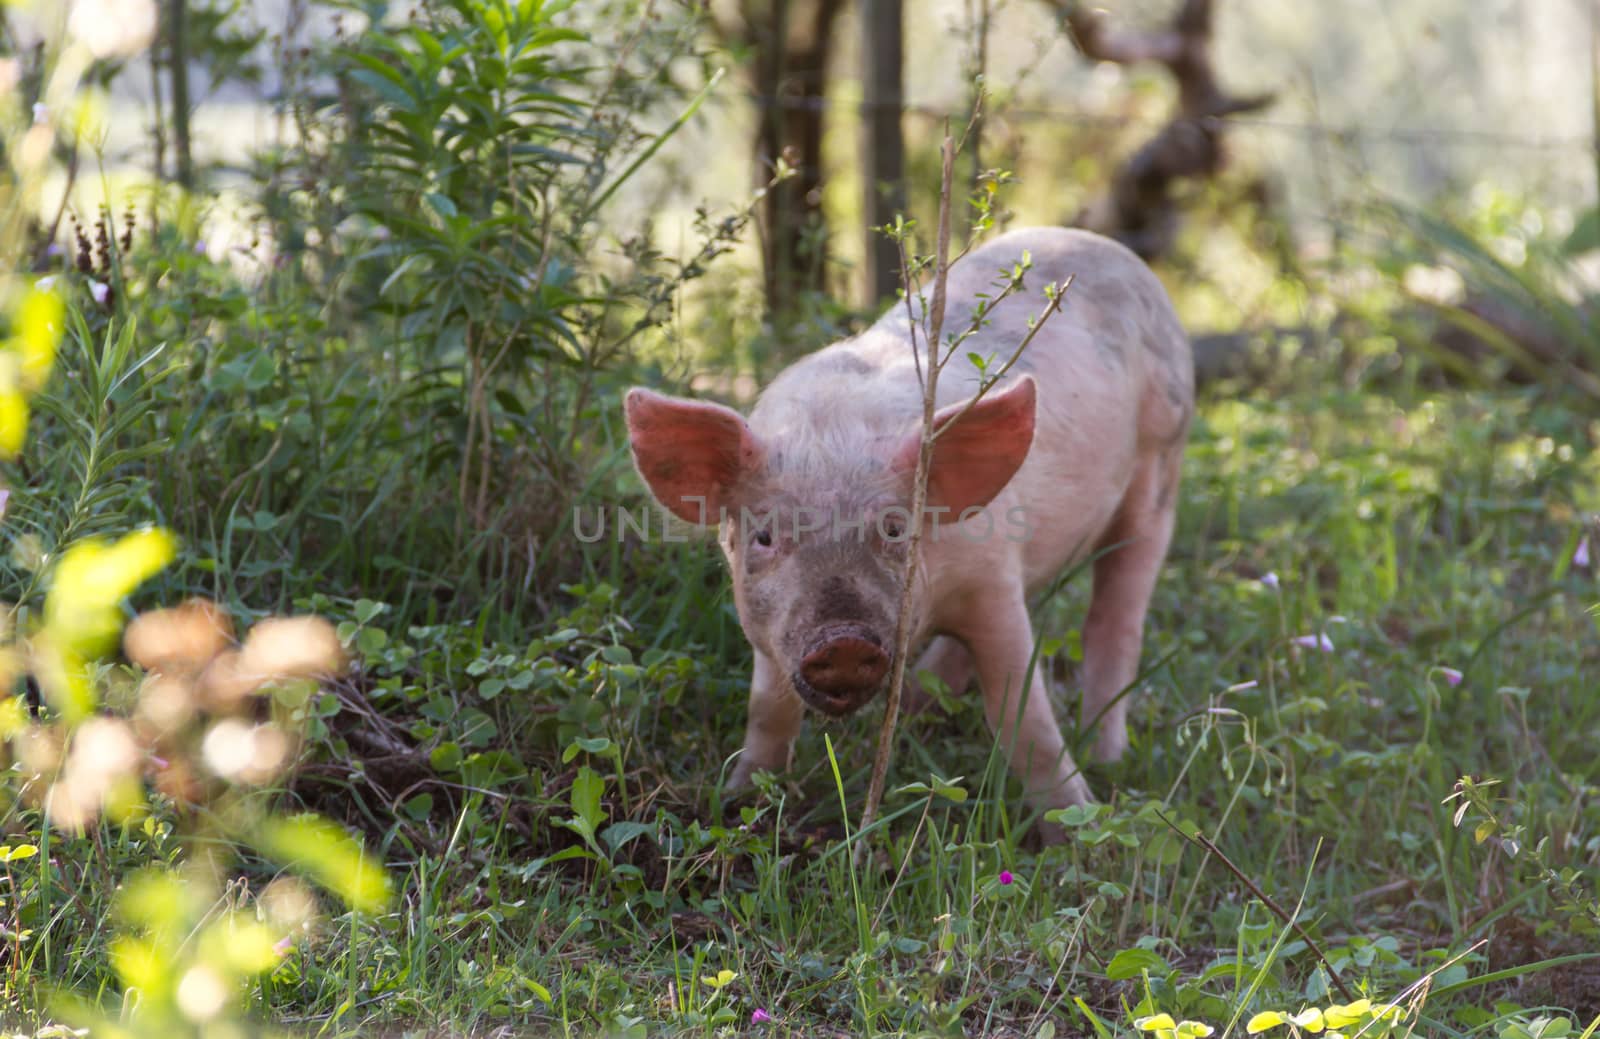 Livestock of loose pigs walking on the farm